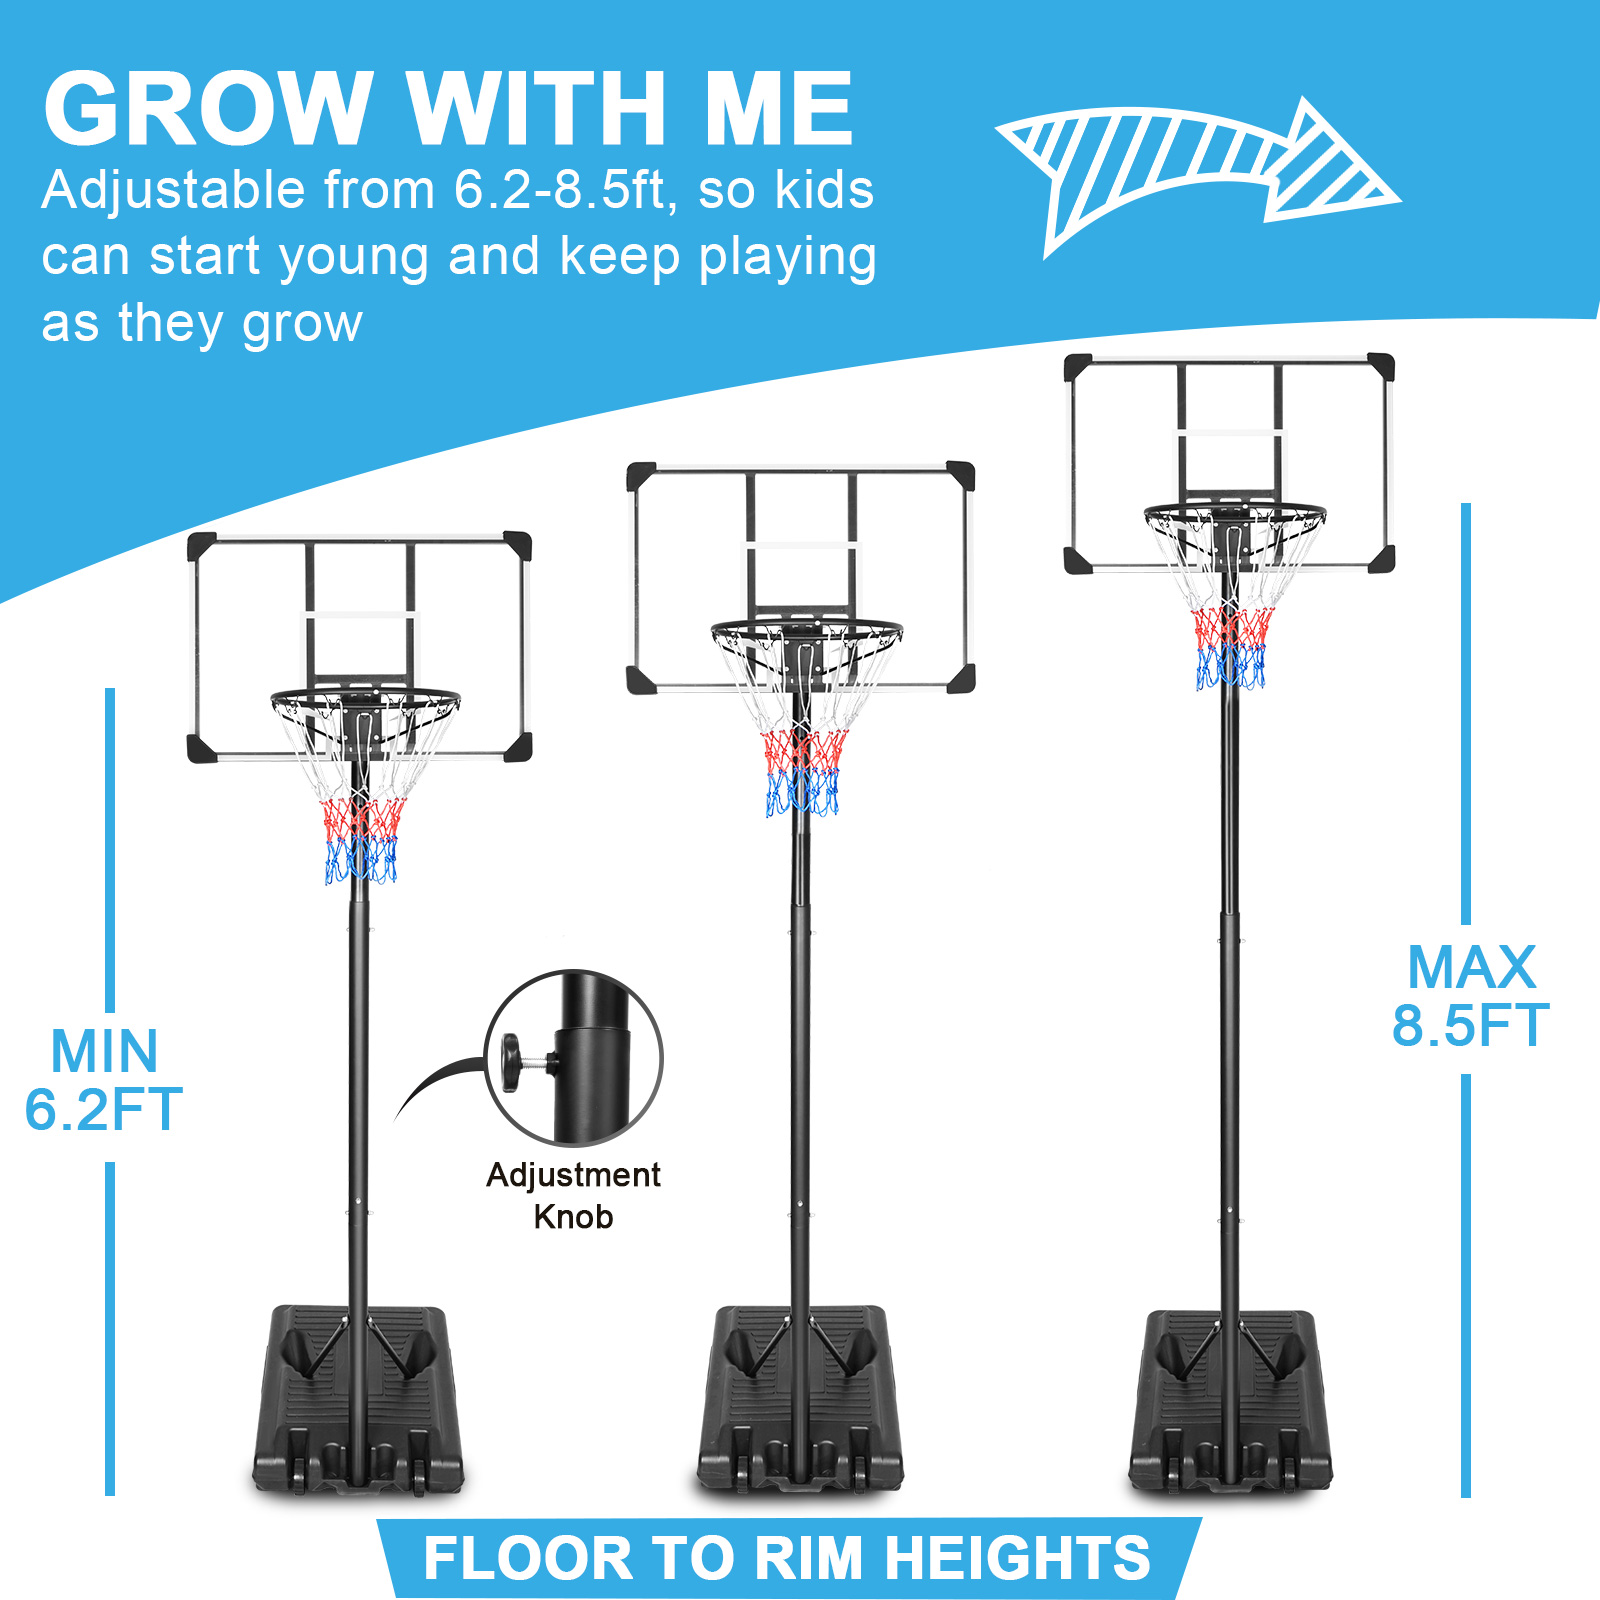 iRerts Portable Basketball Hoop for Teens Kids, Height Adjusted 6.2-8.5ft Indoor Basketball Goal System, Basketball Hoop Outdoor with Wheels and Backboard for Playground Backyard, Black - image 2 of 8